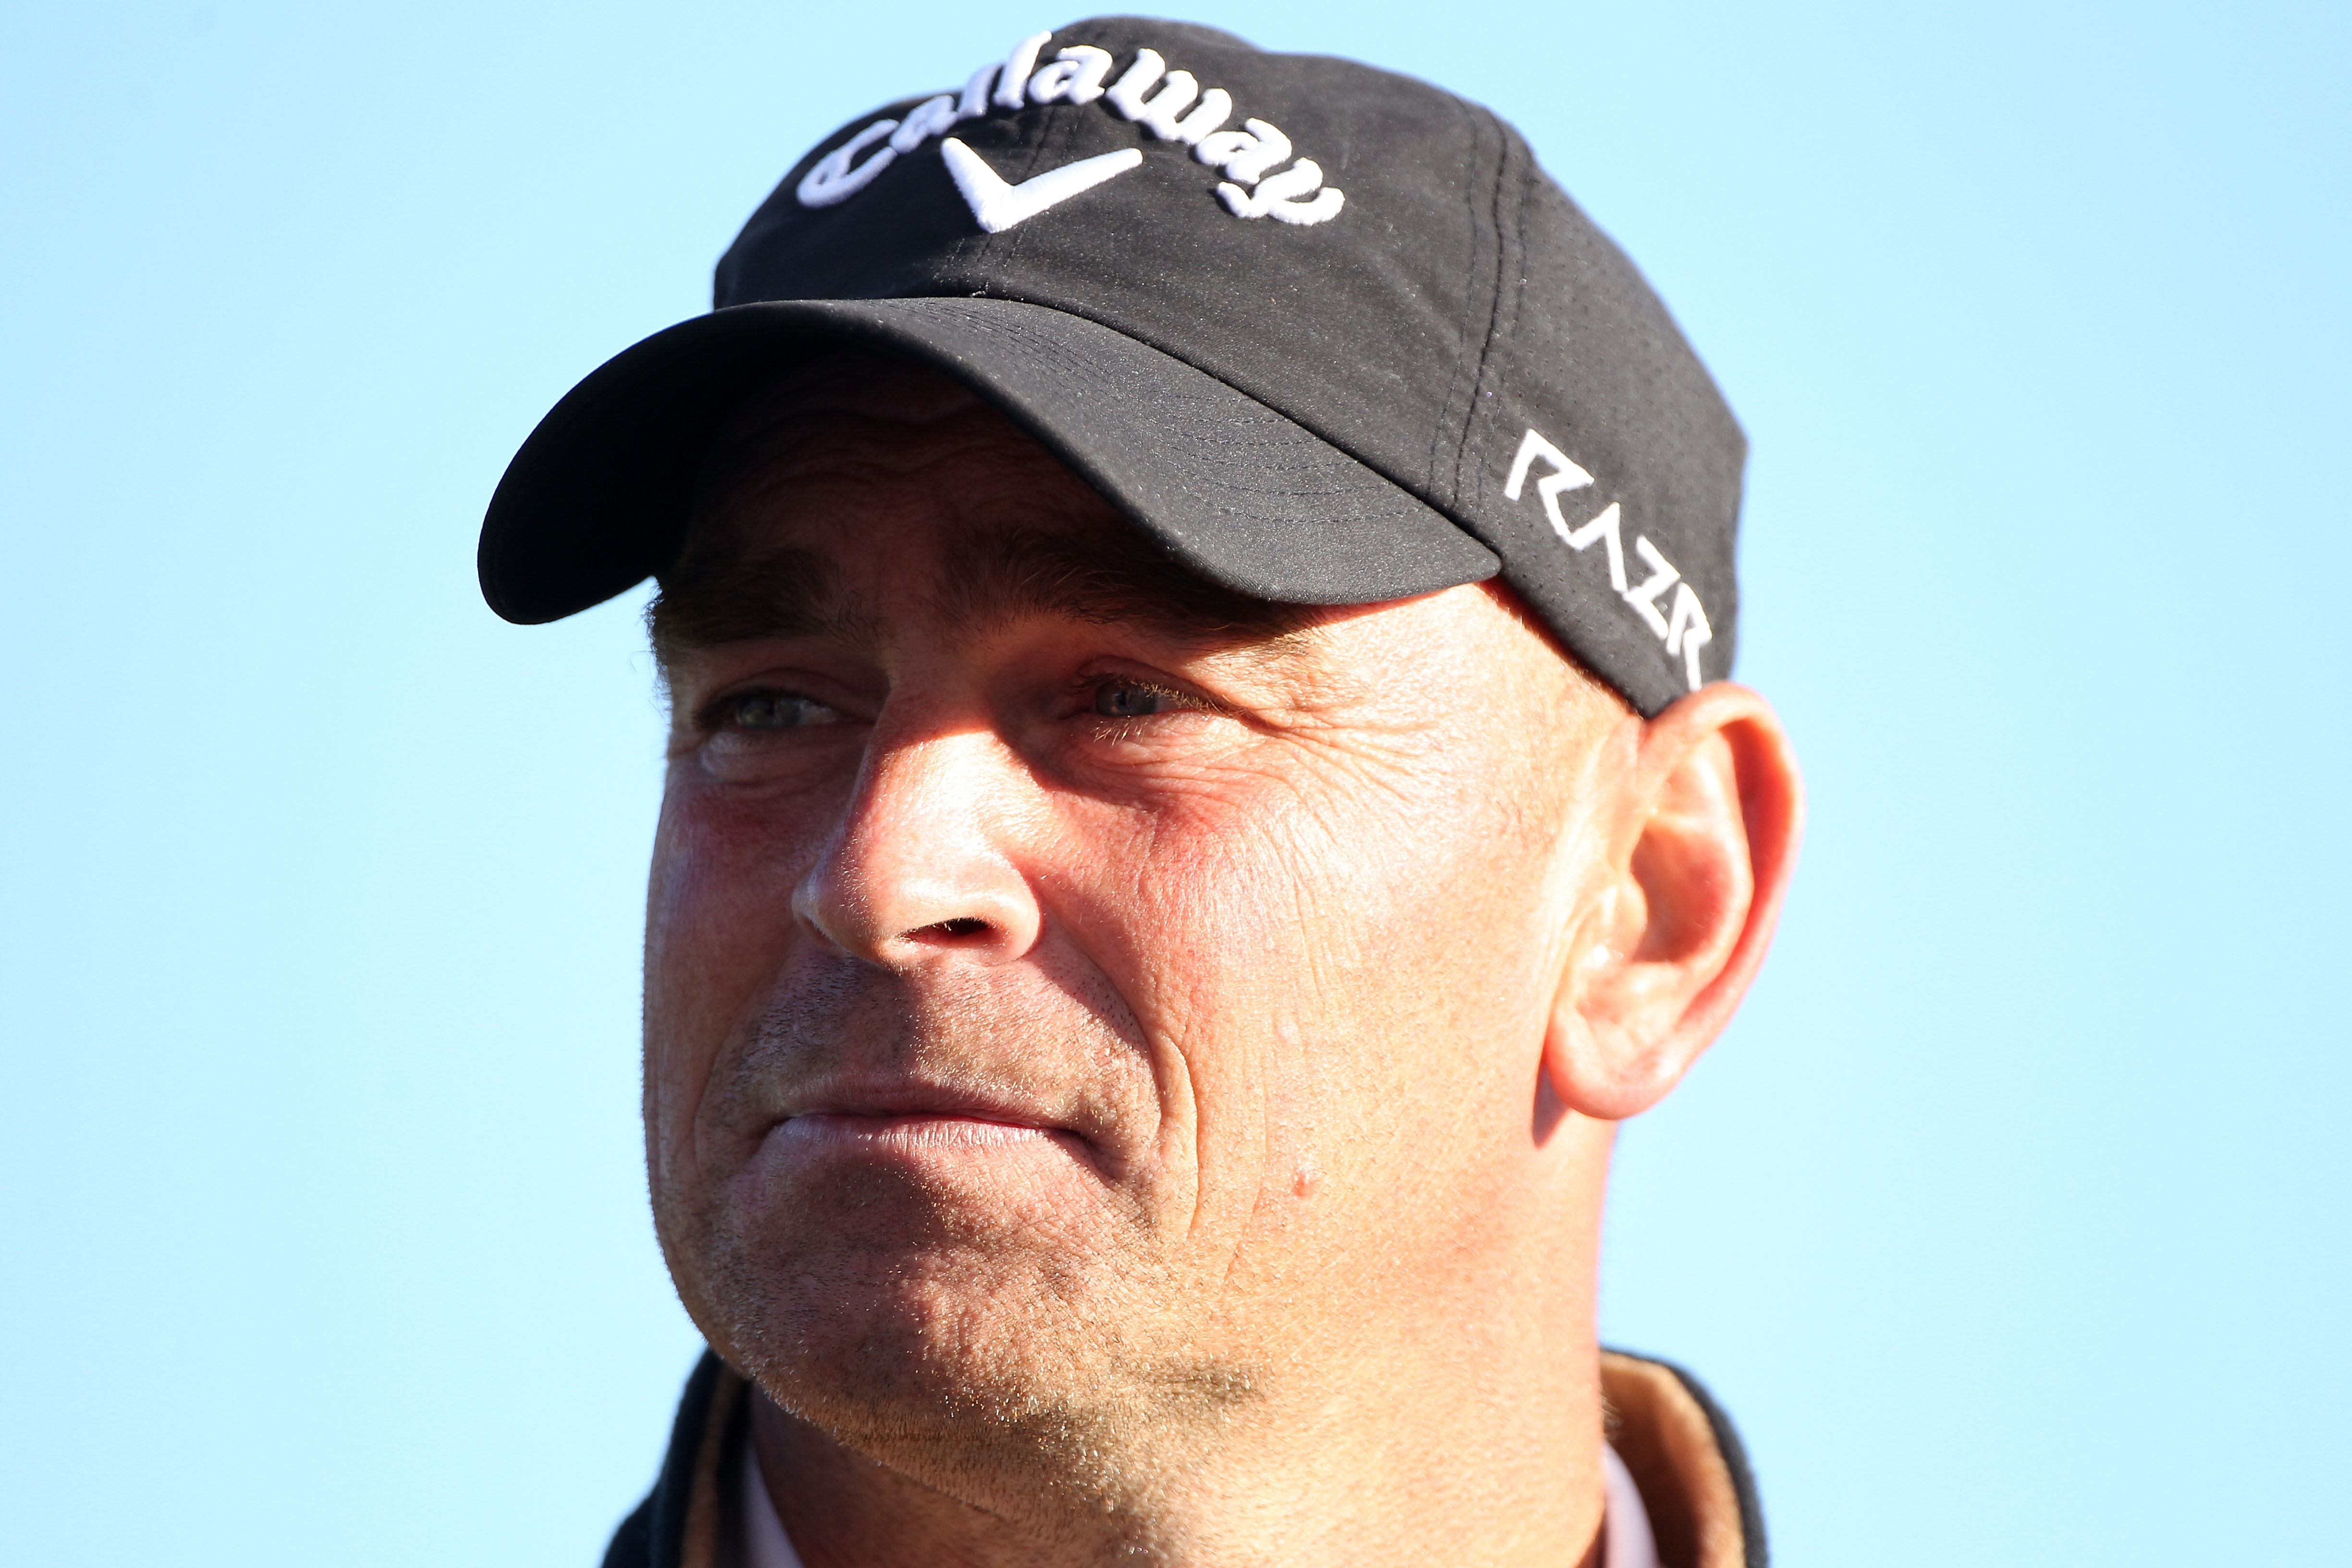 MARANA, AZ - FEBRUARY 23:  Thomas Bjorn of Denmark looks on after defeating Tiger Woods (not pictured) on the 19th hole during the first round of the Accenture Match Play Championship at the Ritz-Carlton Golf Club on February 23, 2011 in Marana, Arizona.